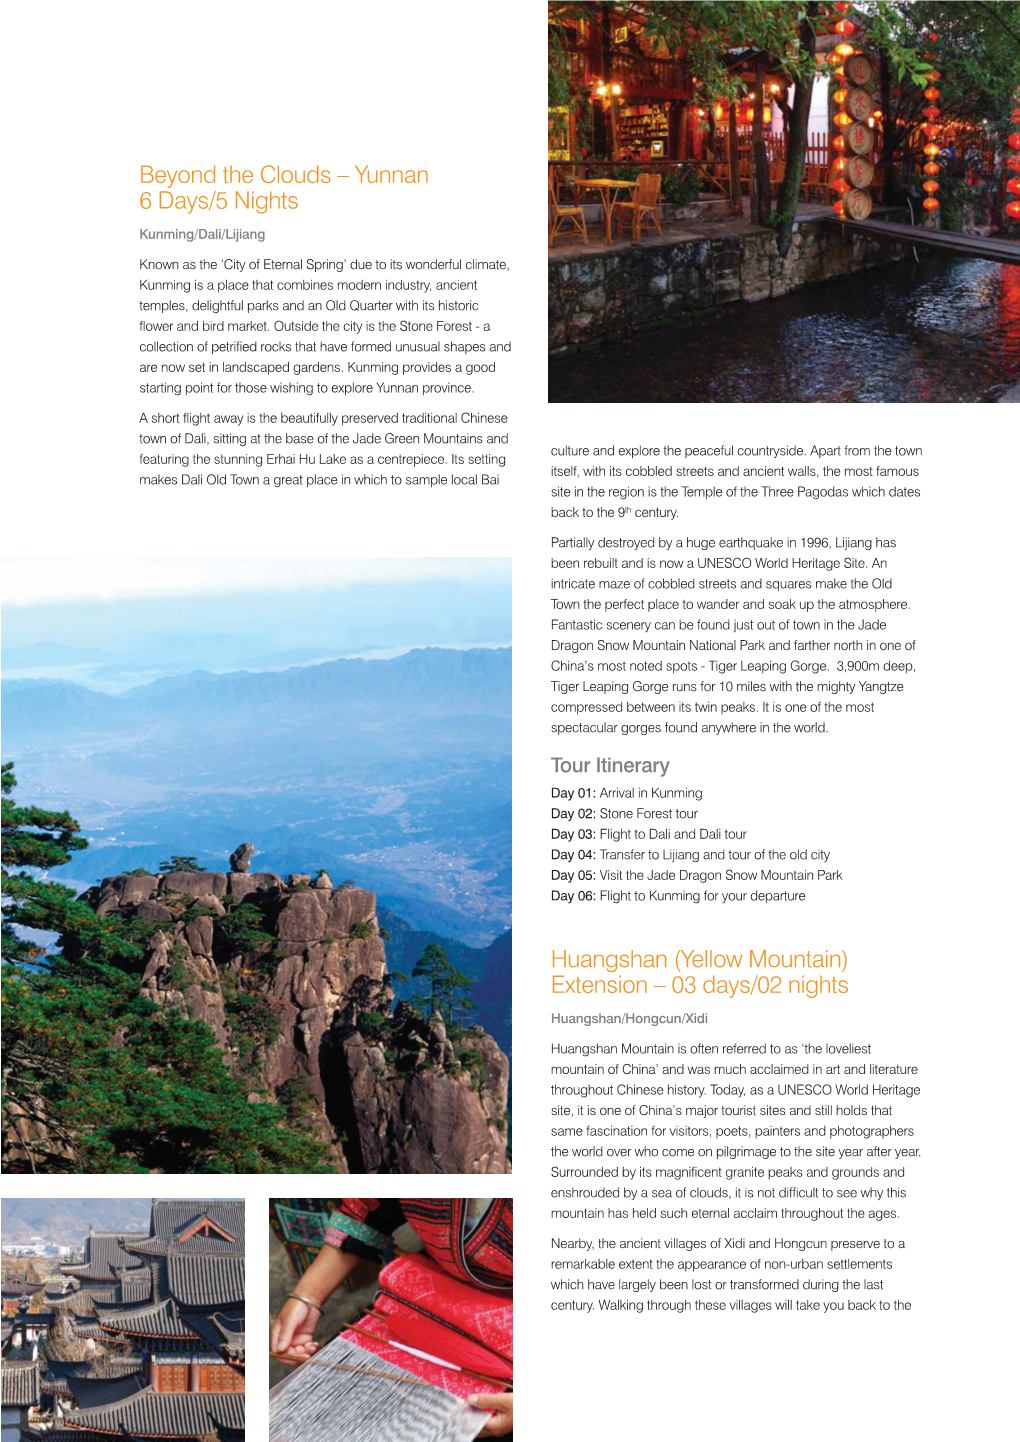 Beyond the Clouds – Yunnan 6 Days/5 Nights